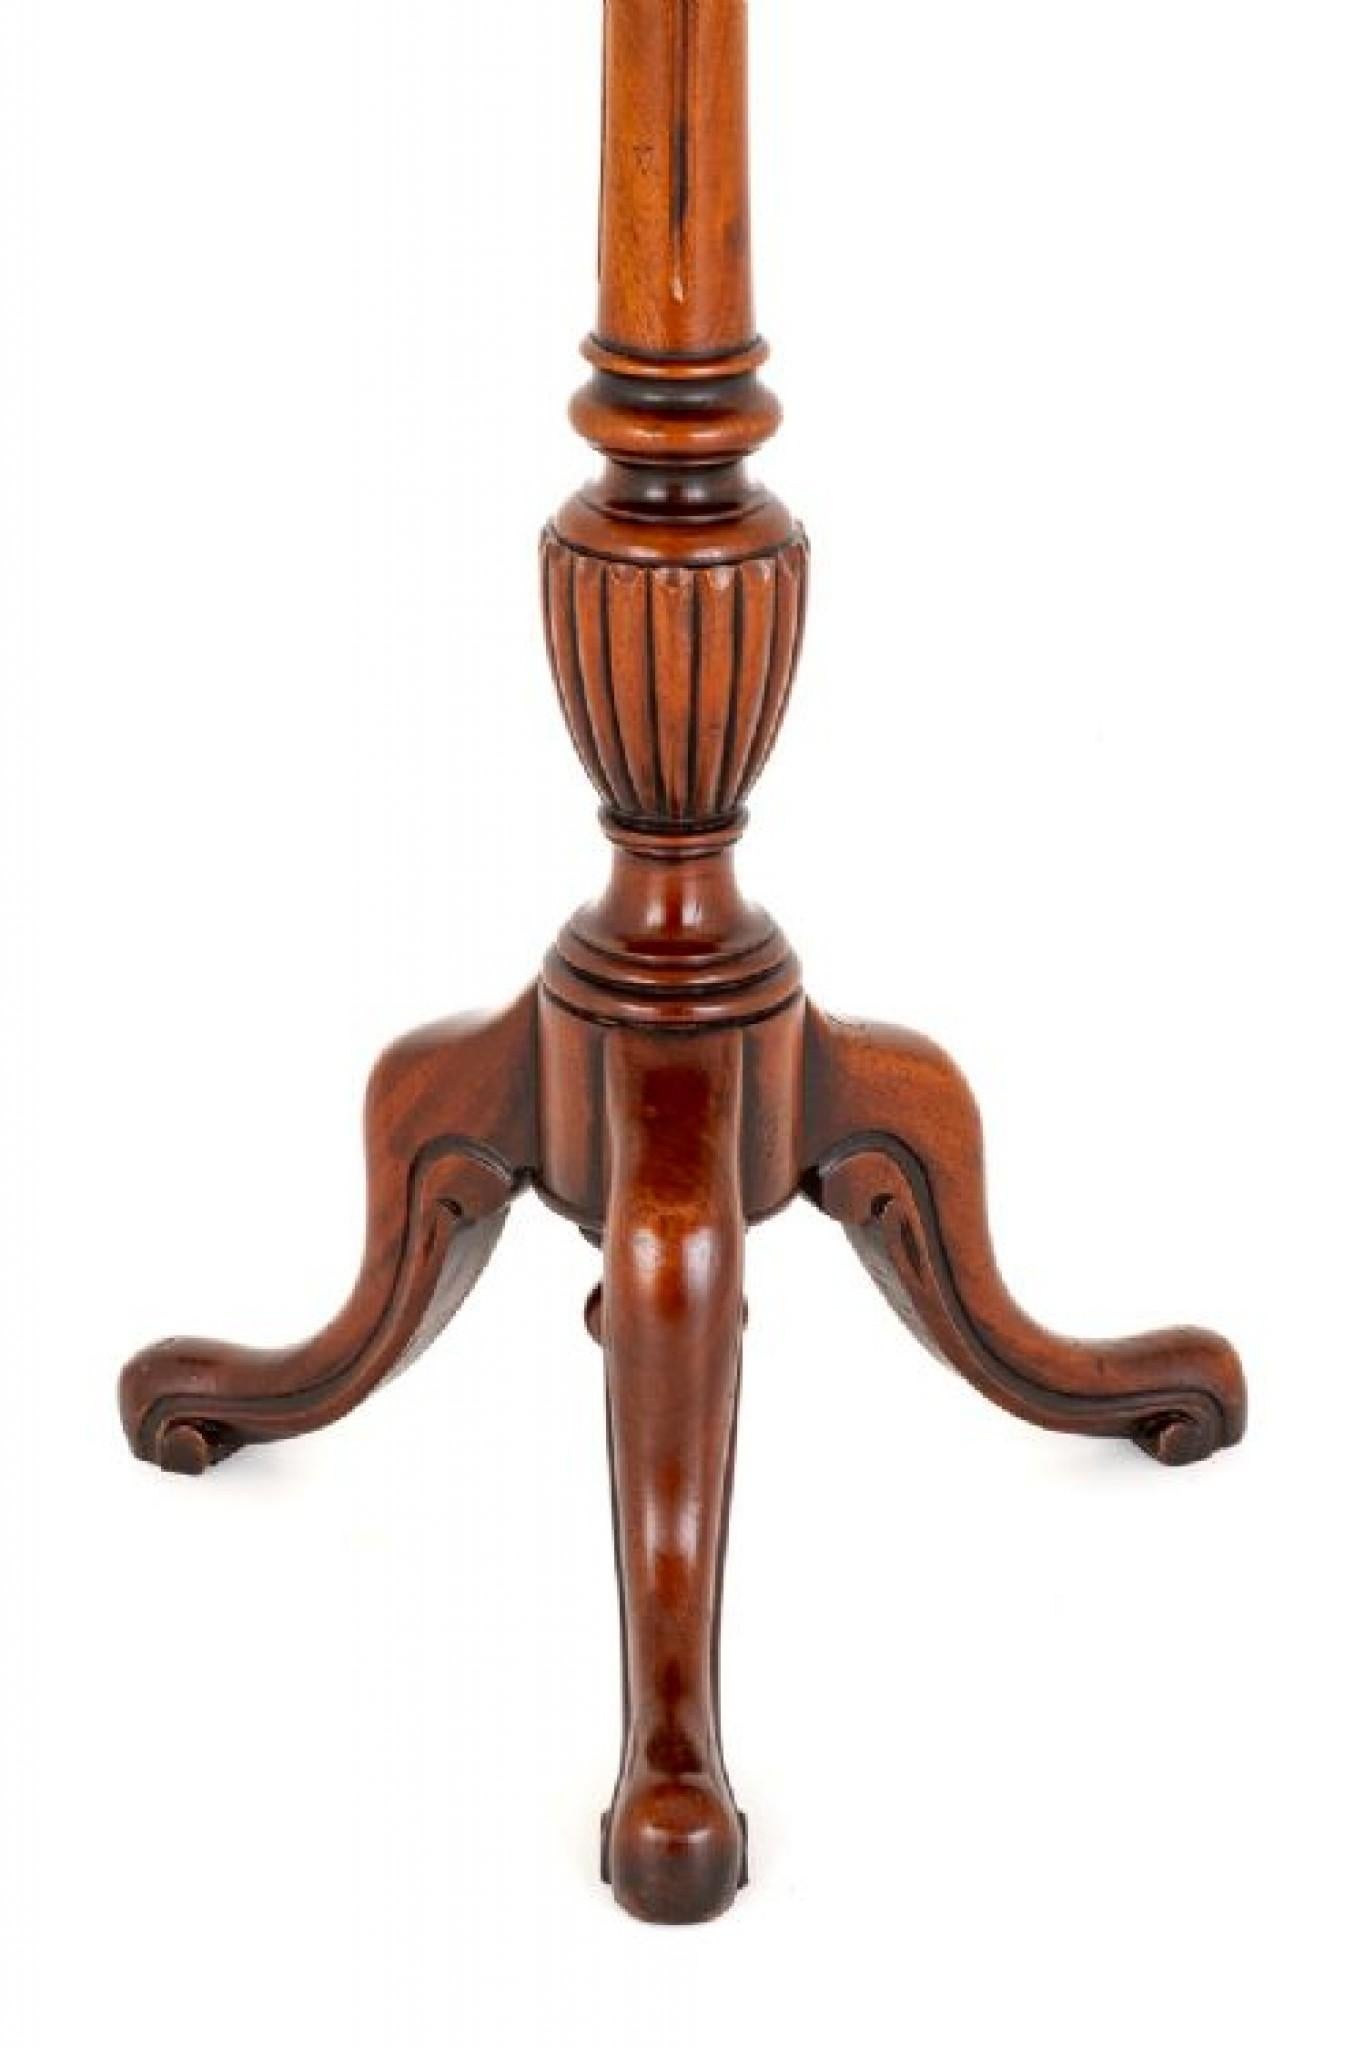 Victorian mahogany shaving stand.
circa 1860
This shaving stand has a turned and fluted column and has swept legs.
The shaving stand features a ring turned shelf and adjustable mirror.